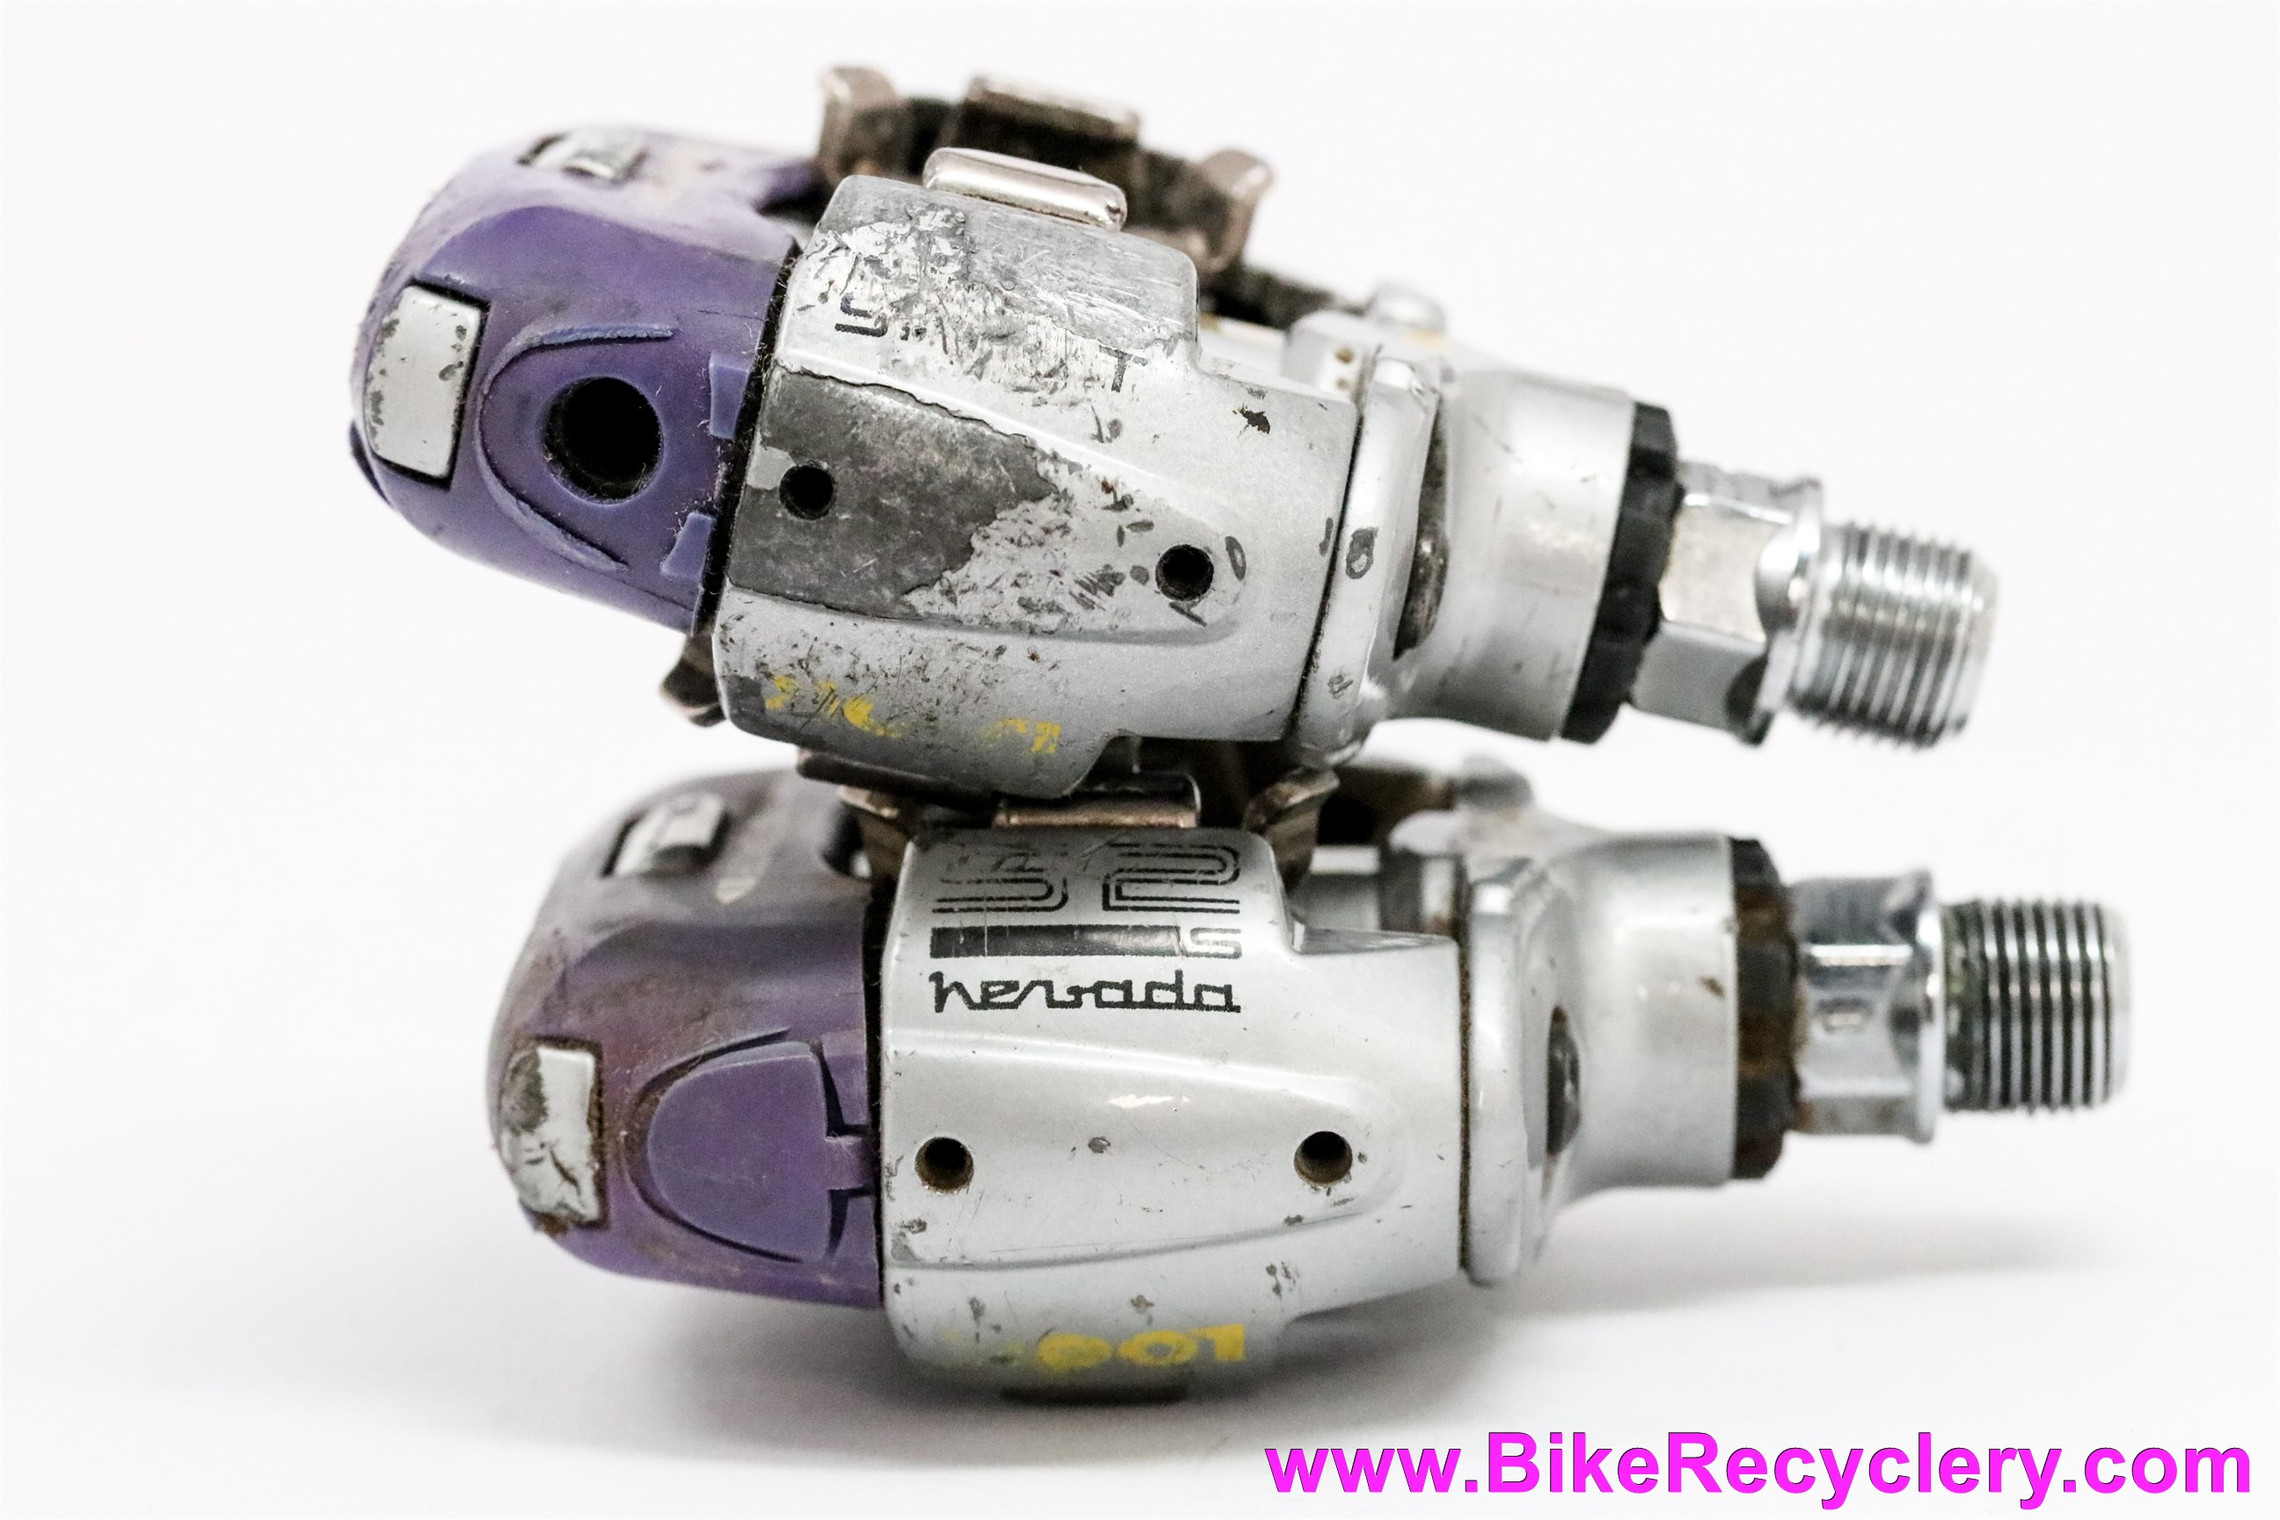 Look S2S Nevada Clipless Pedals: 1990's MTB - Purple